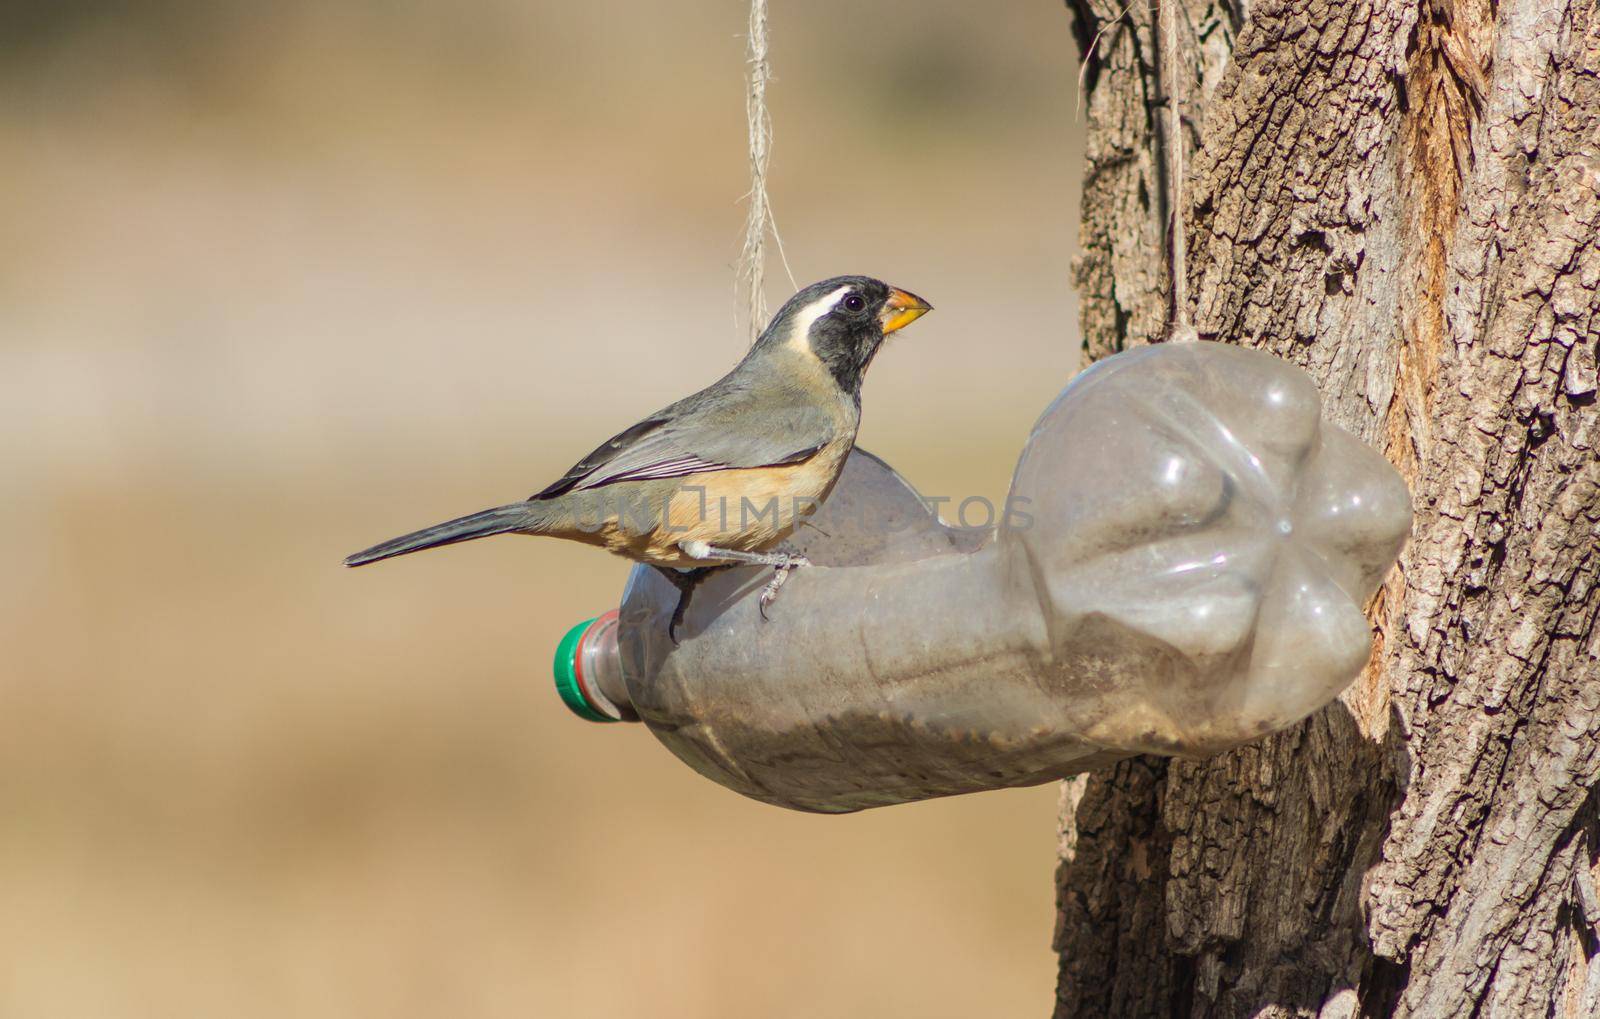 a Saltator aurantiirostris eating in the recycled bottle eater in winter